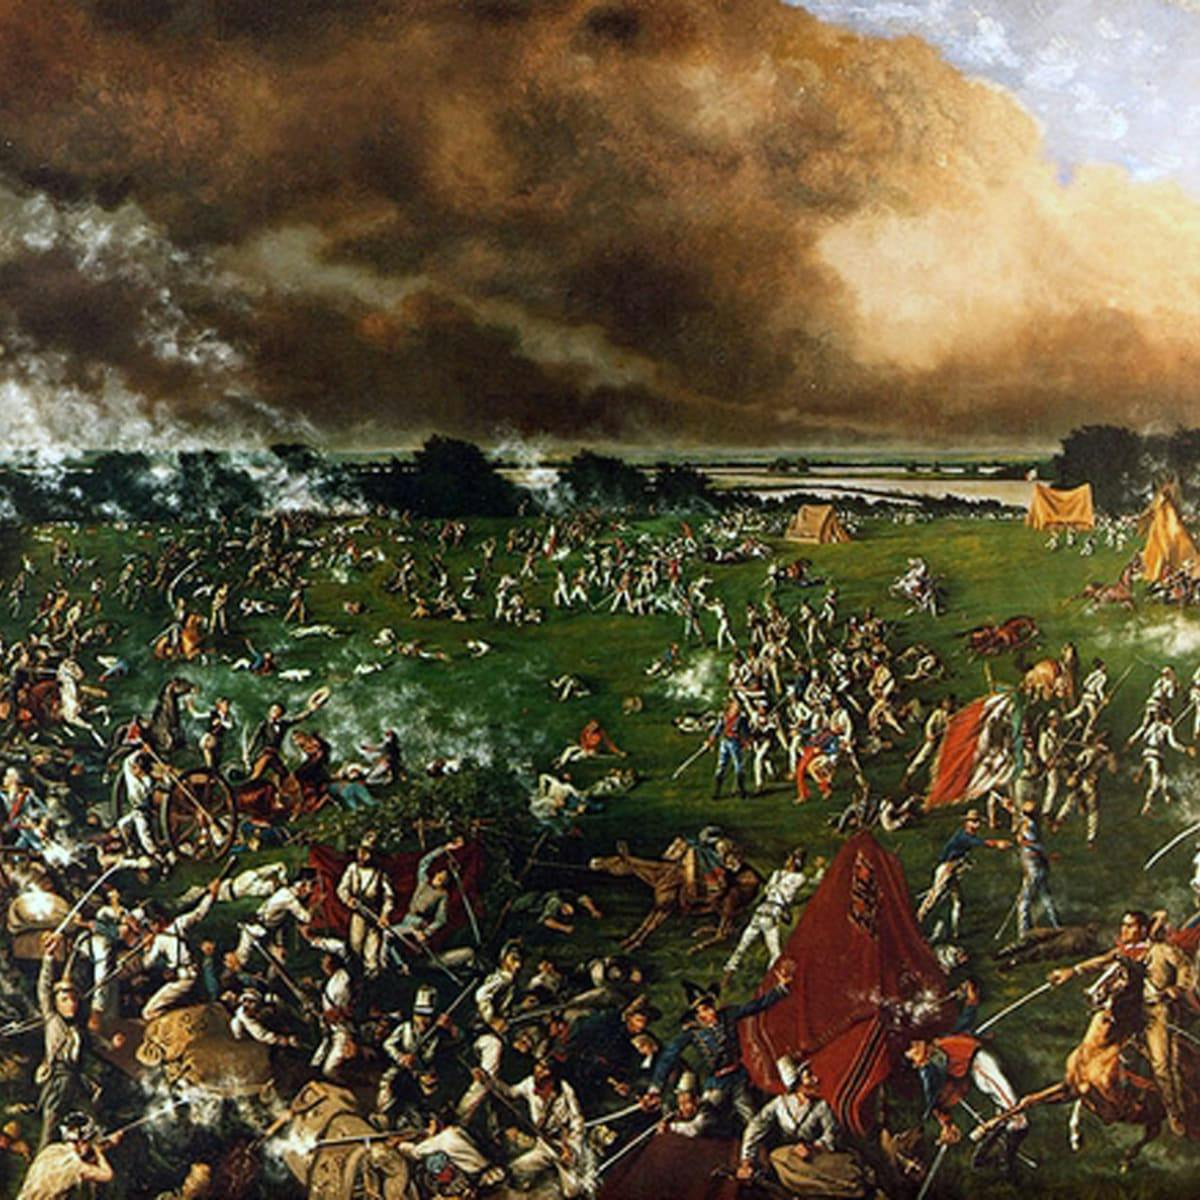 Daily Dose of Texas History - April 21, 1836- The Battle of San Jacinto